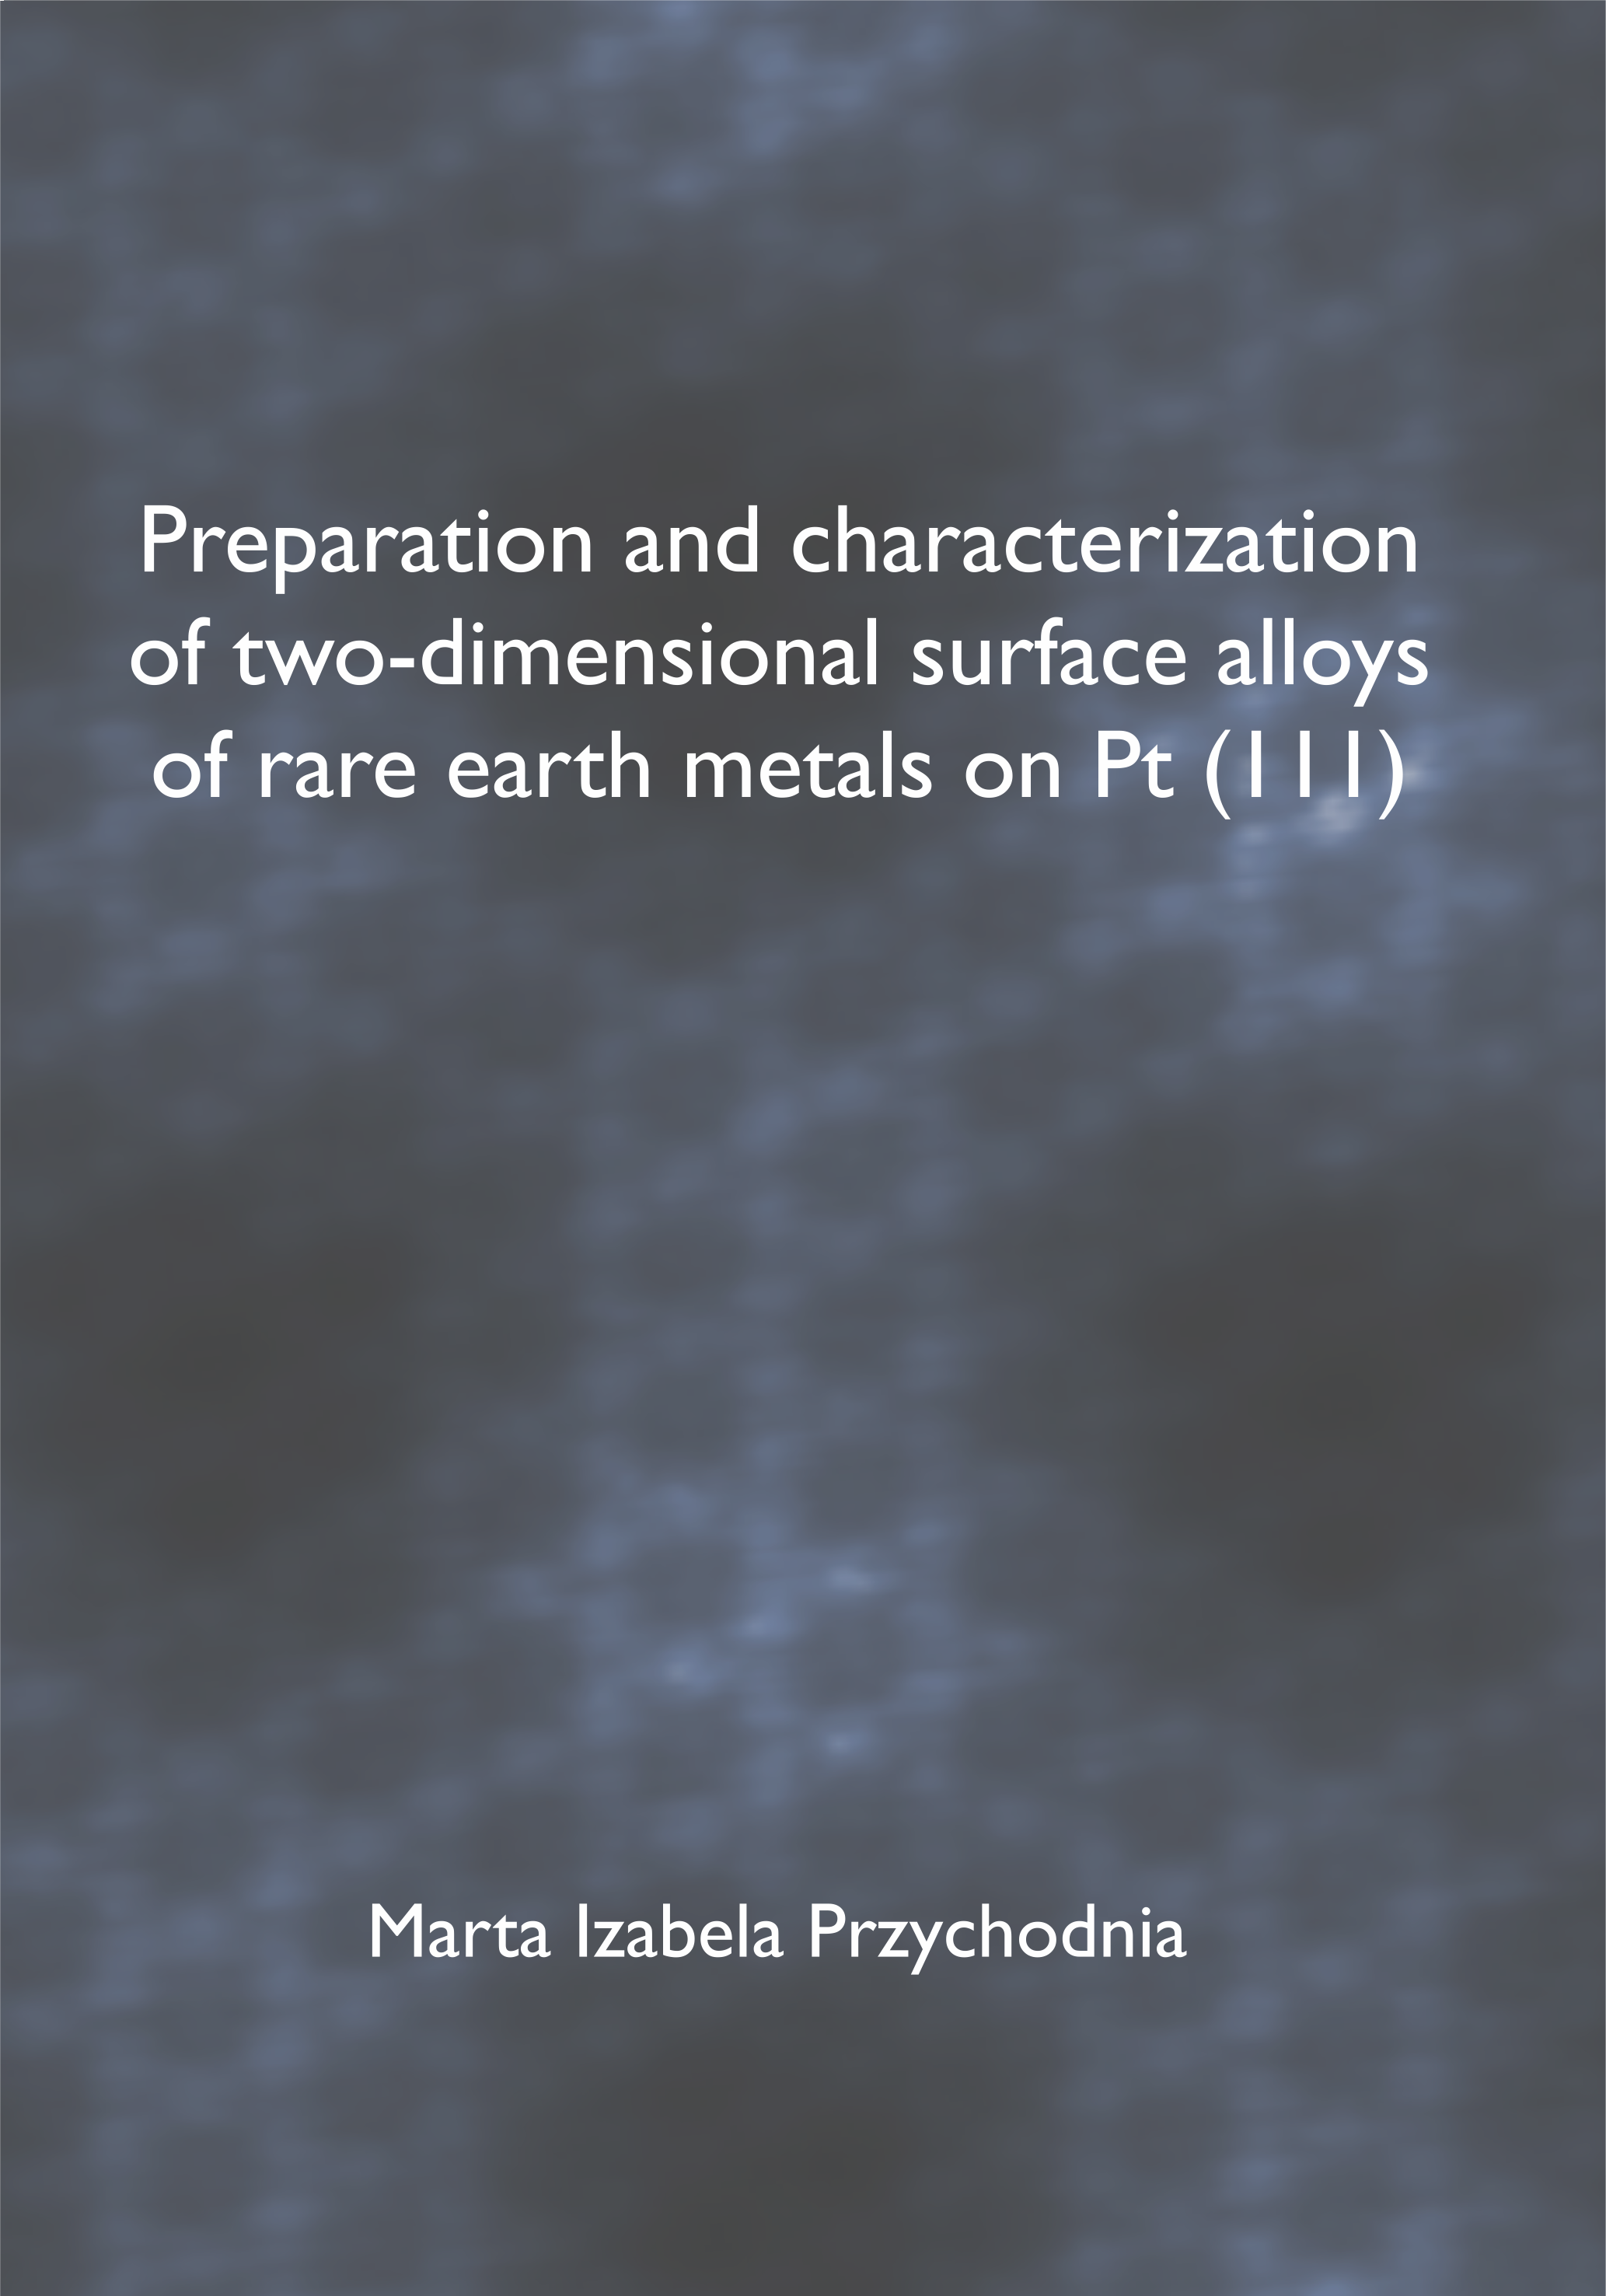 Preparation and characterization of two-dimensional surface alloys of rare earth metals on Pt(111)